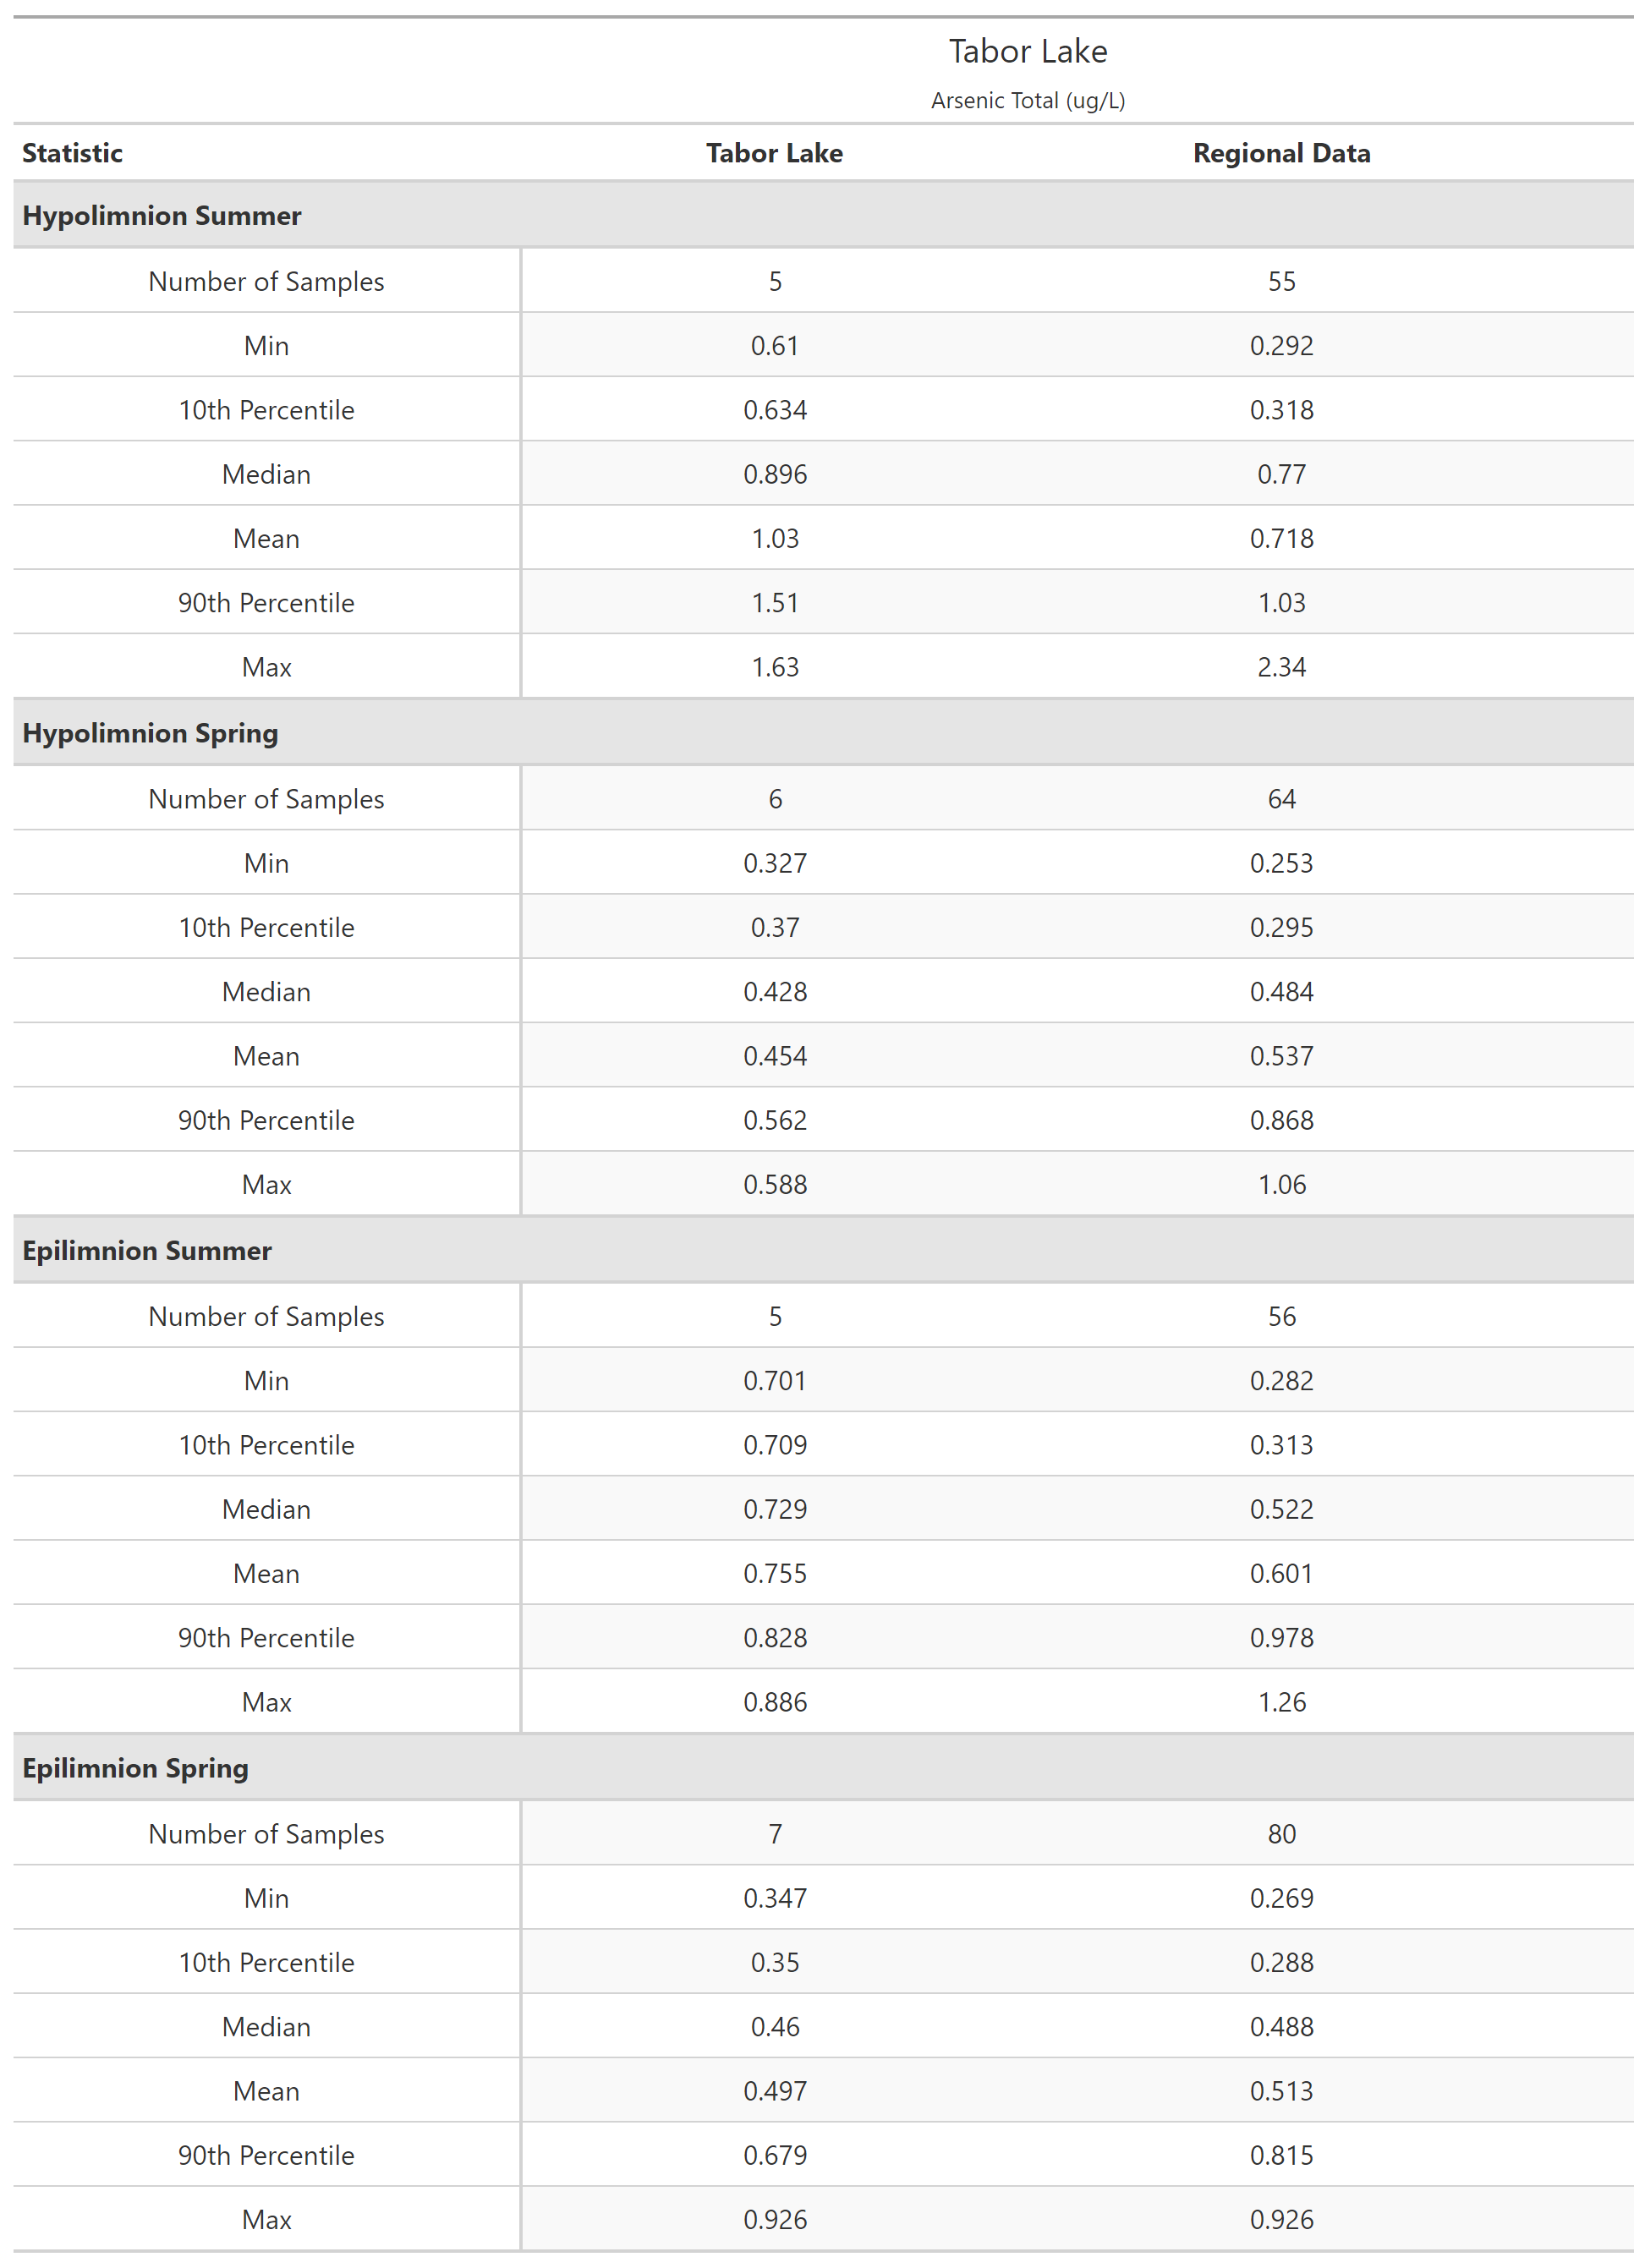 A table of summary statistics for Arsenic Total with comparison to regional data